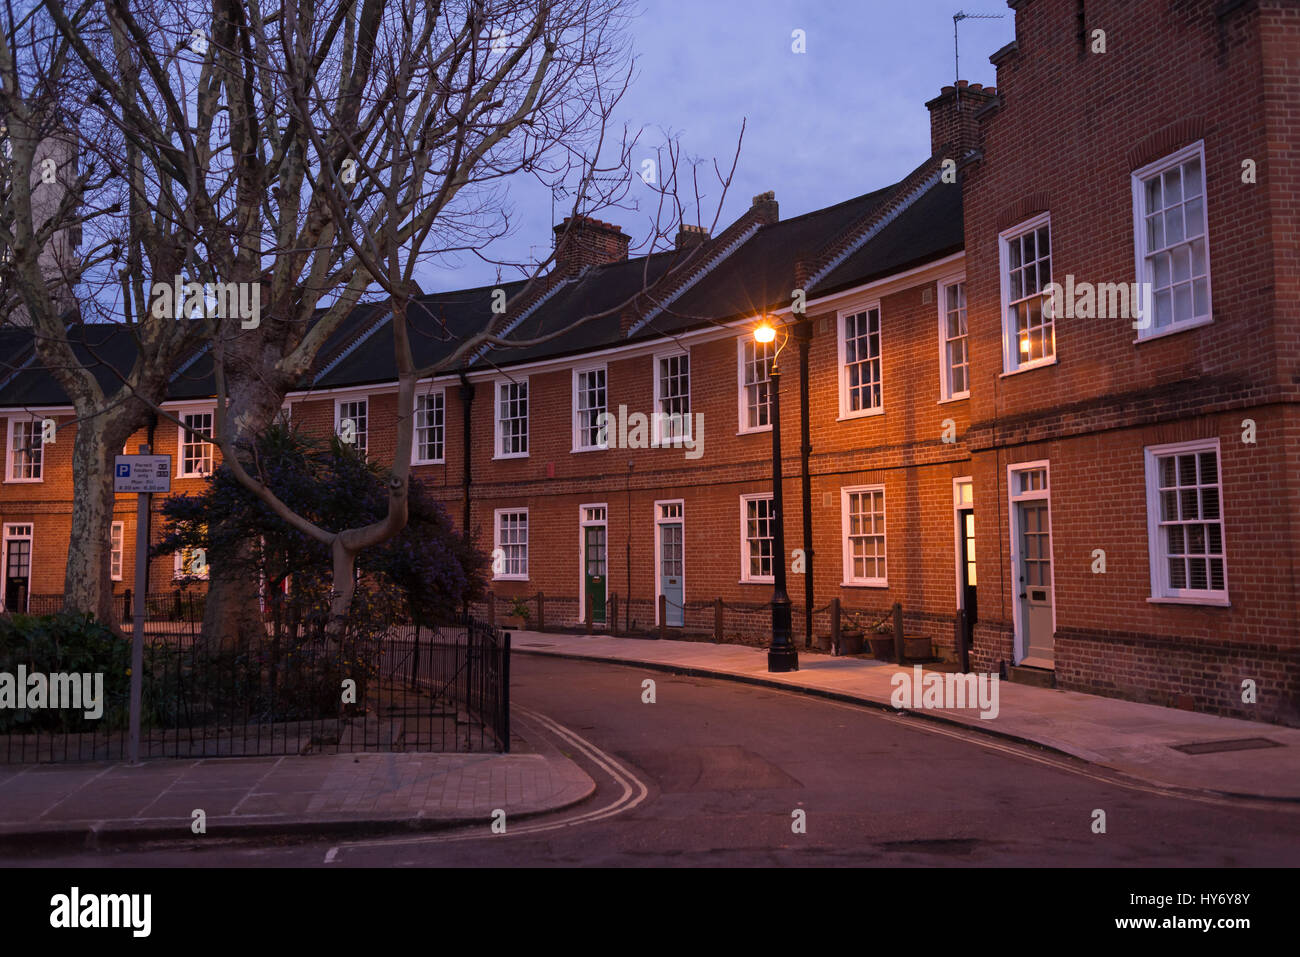 Restored Edwardian brick houses on a local road at night with street lamp Stock Photo